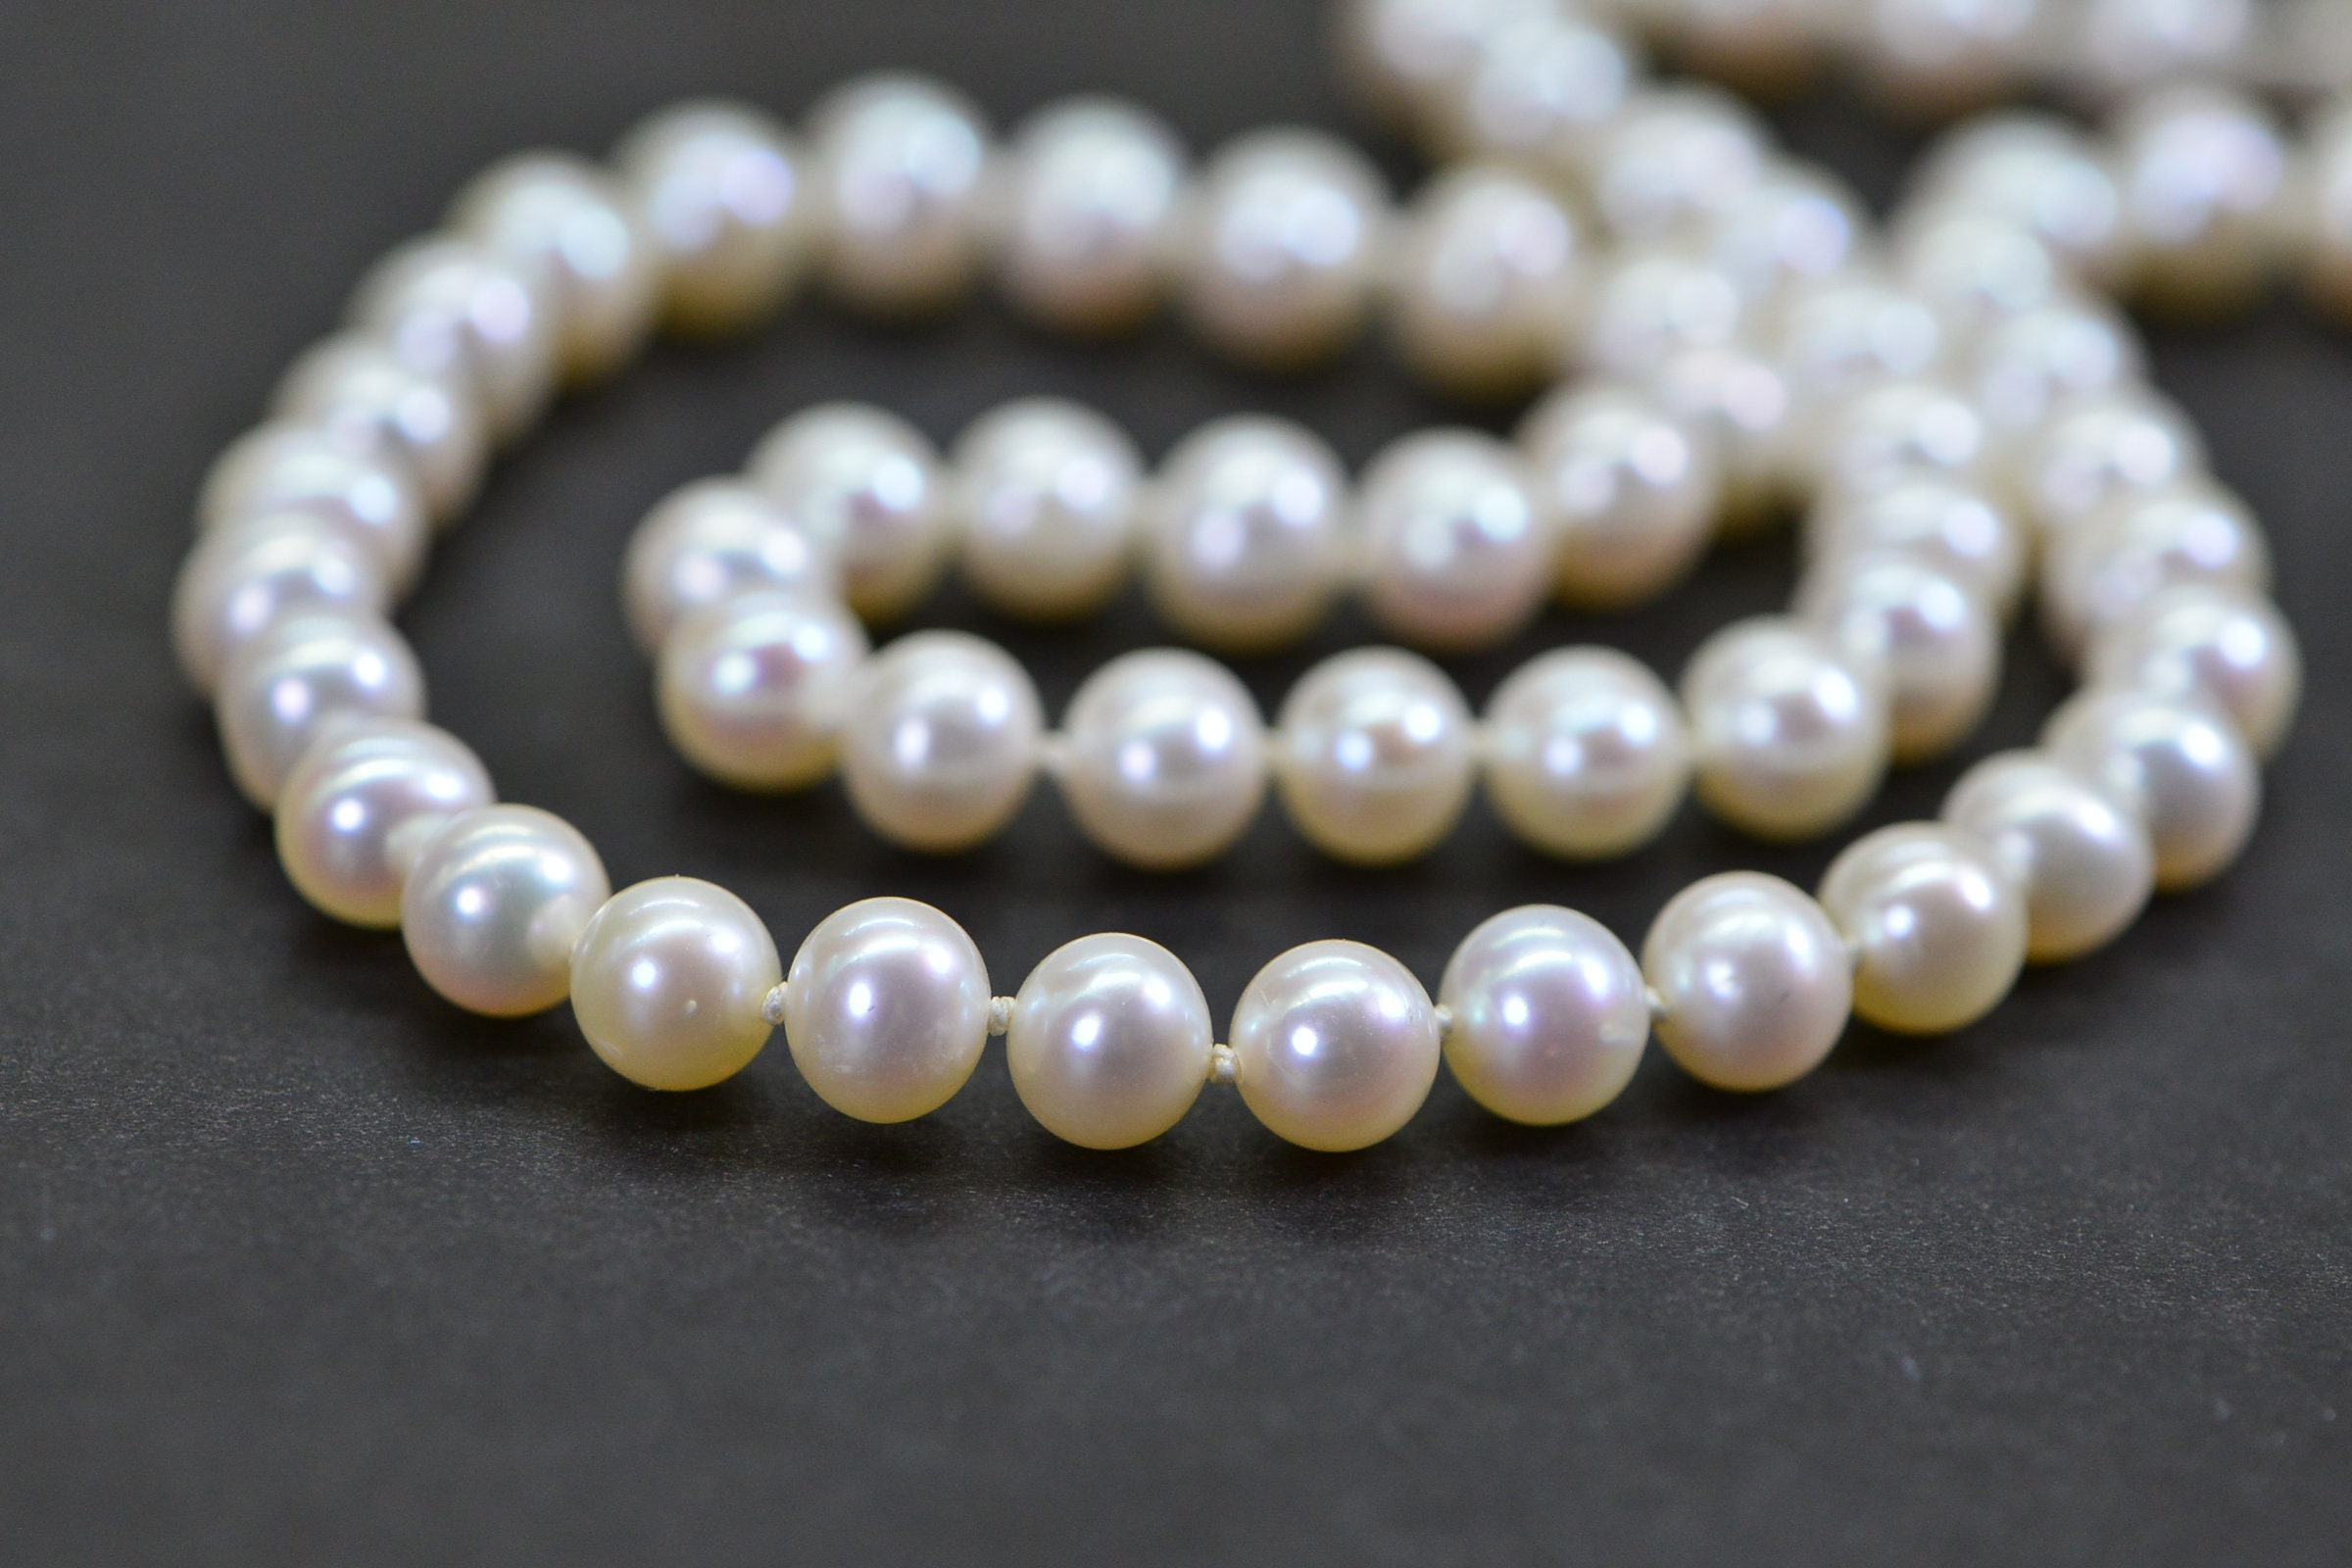 6mm Pearl + Padlock Necklace – Zotic